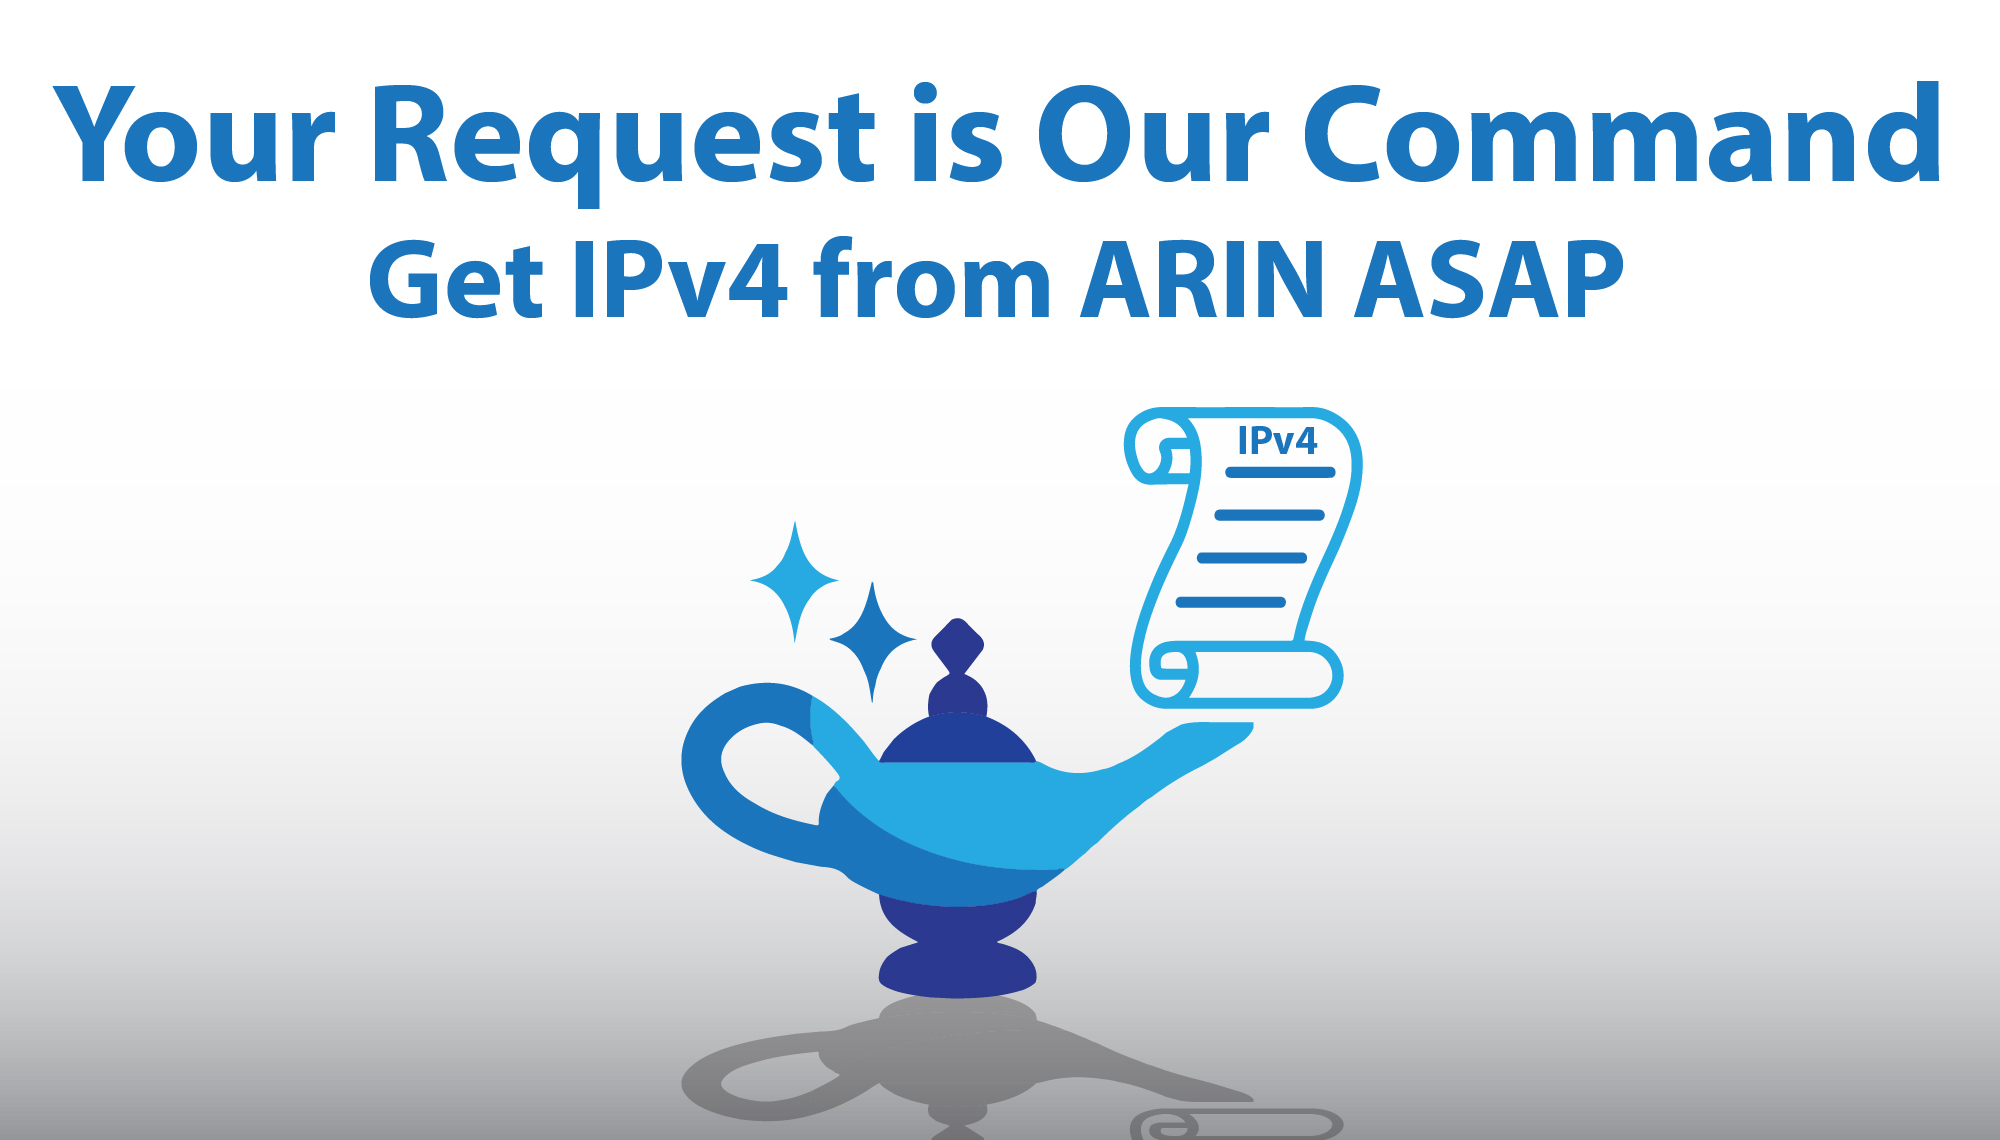 Your Request is Our Command: Get IPv4 from ARIN ASAP